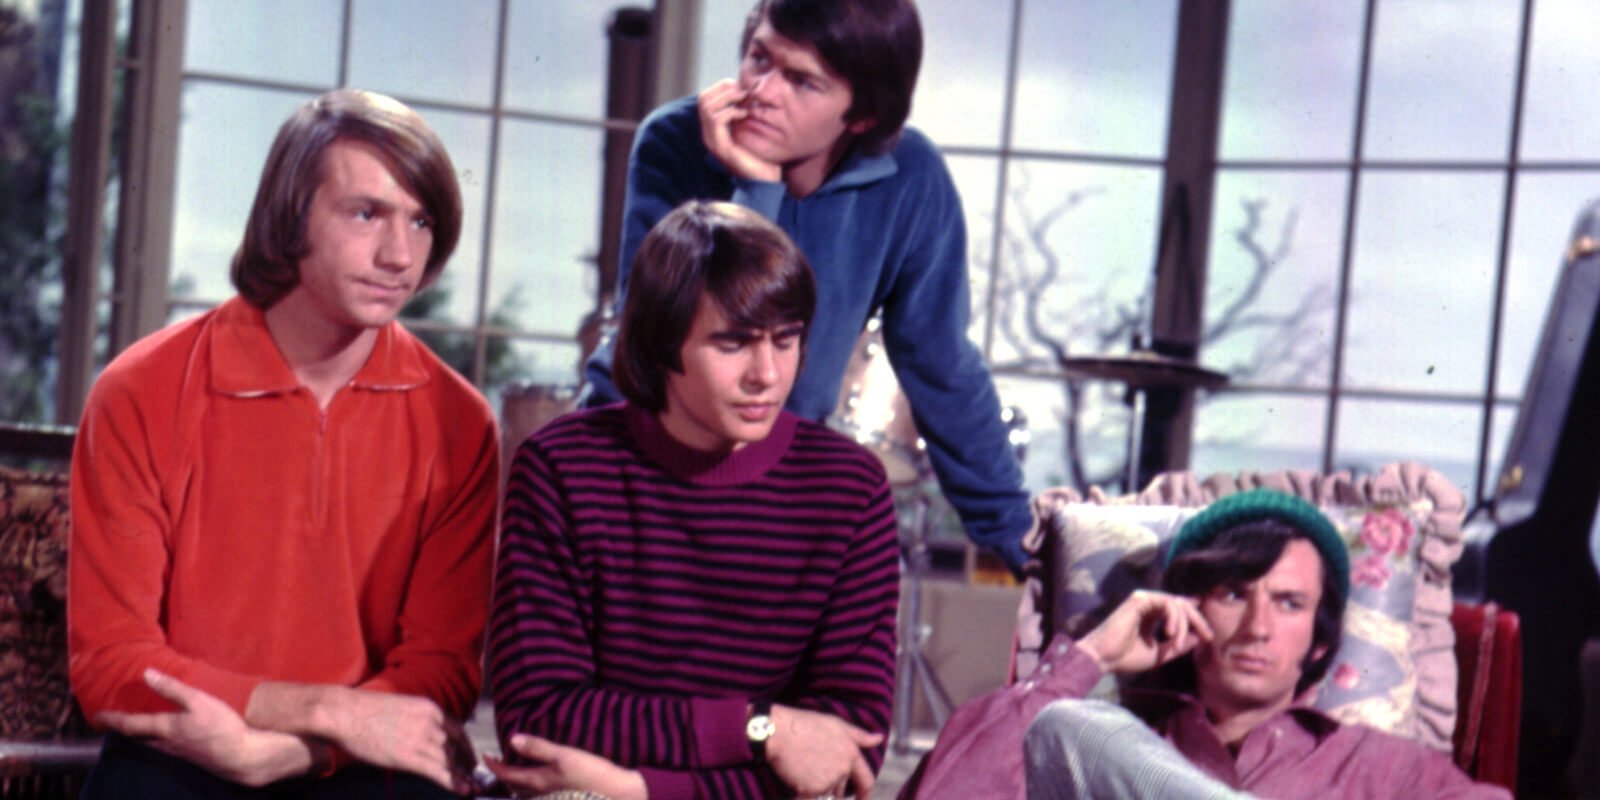 The Monkees cast included Peter Tork, Davy Jones, Micky Dolenz and Mike Nesmith.